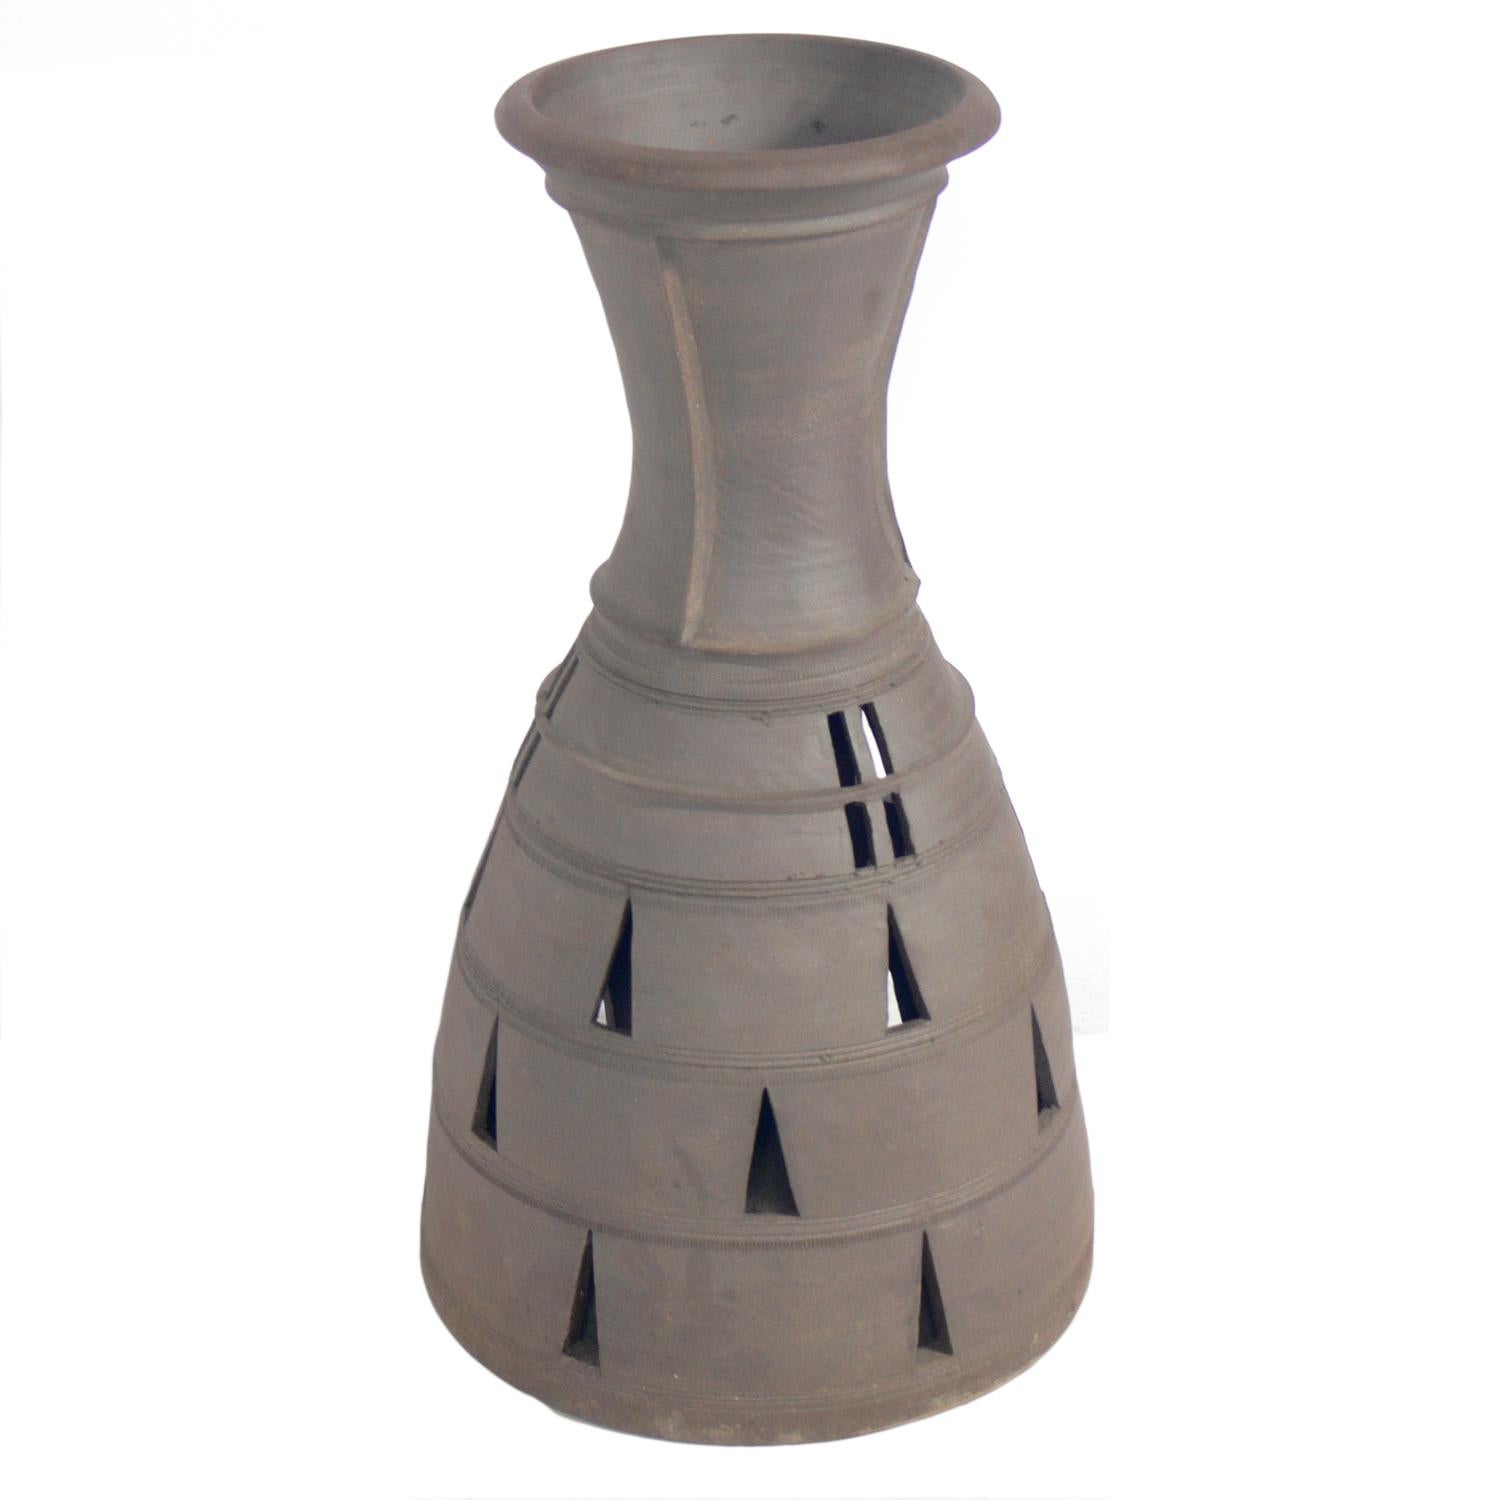 Large scale sculptural ceramic vase, believed to be American, circa 1960s. It is signed with the artist's cipher, but we are unable to research the artist. It stands an impressive 29